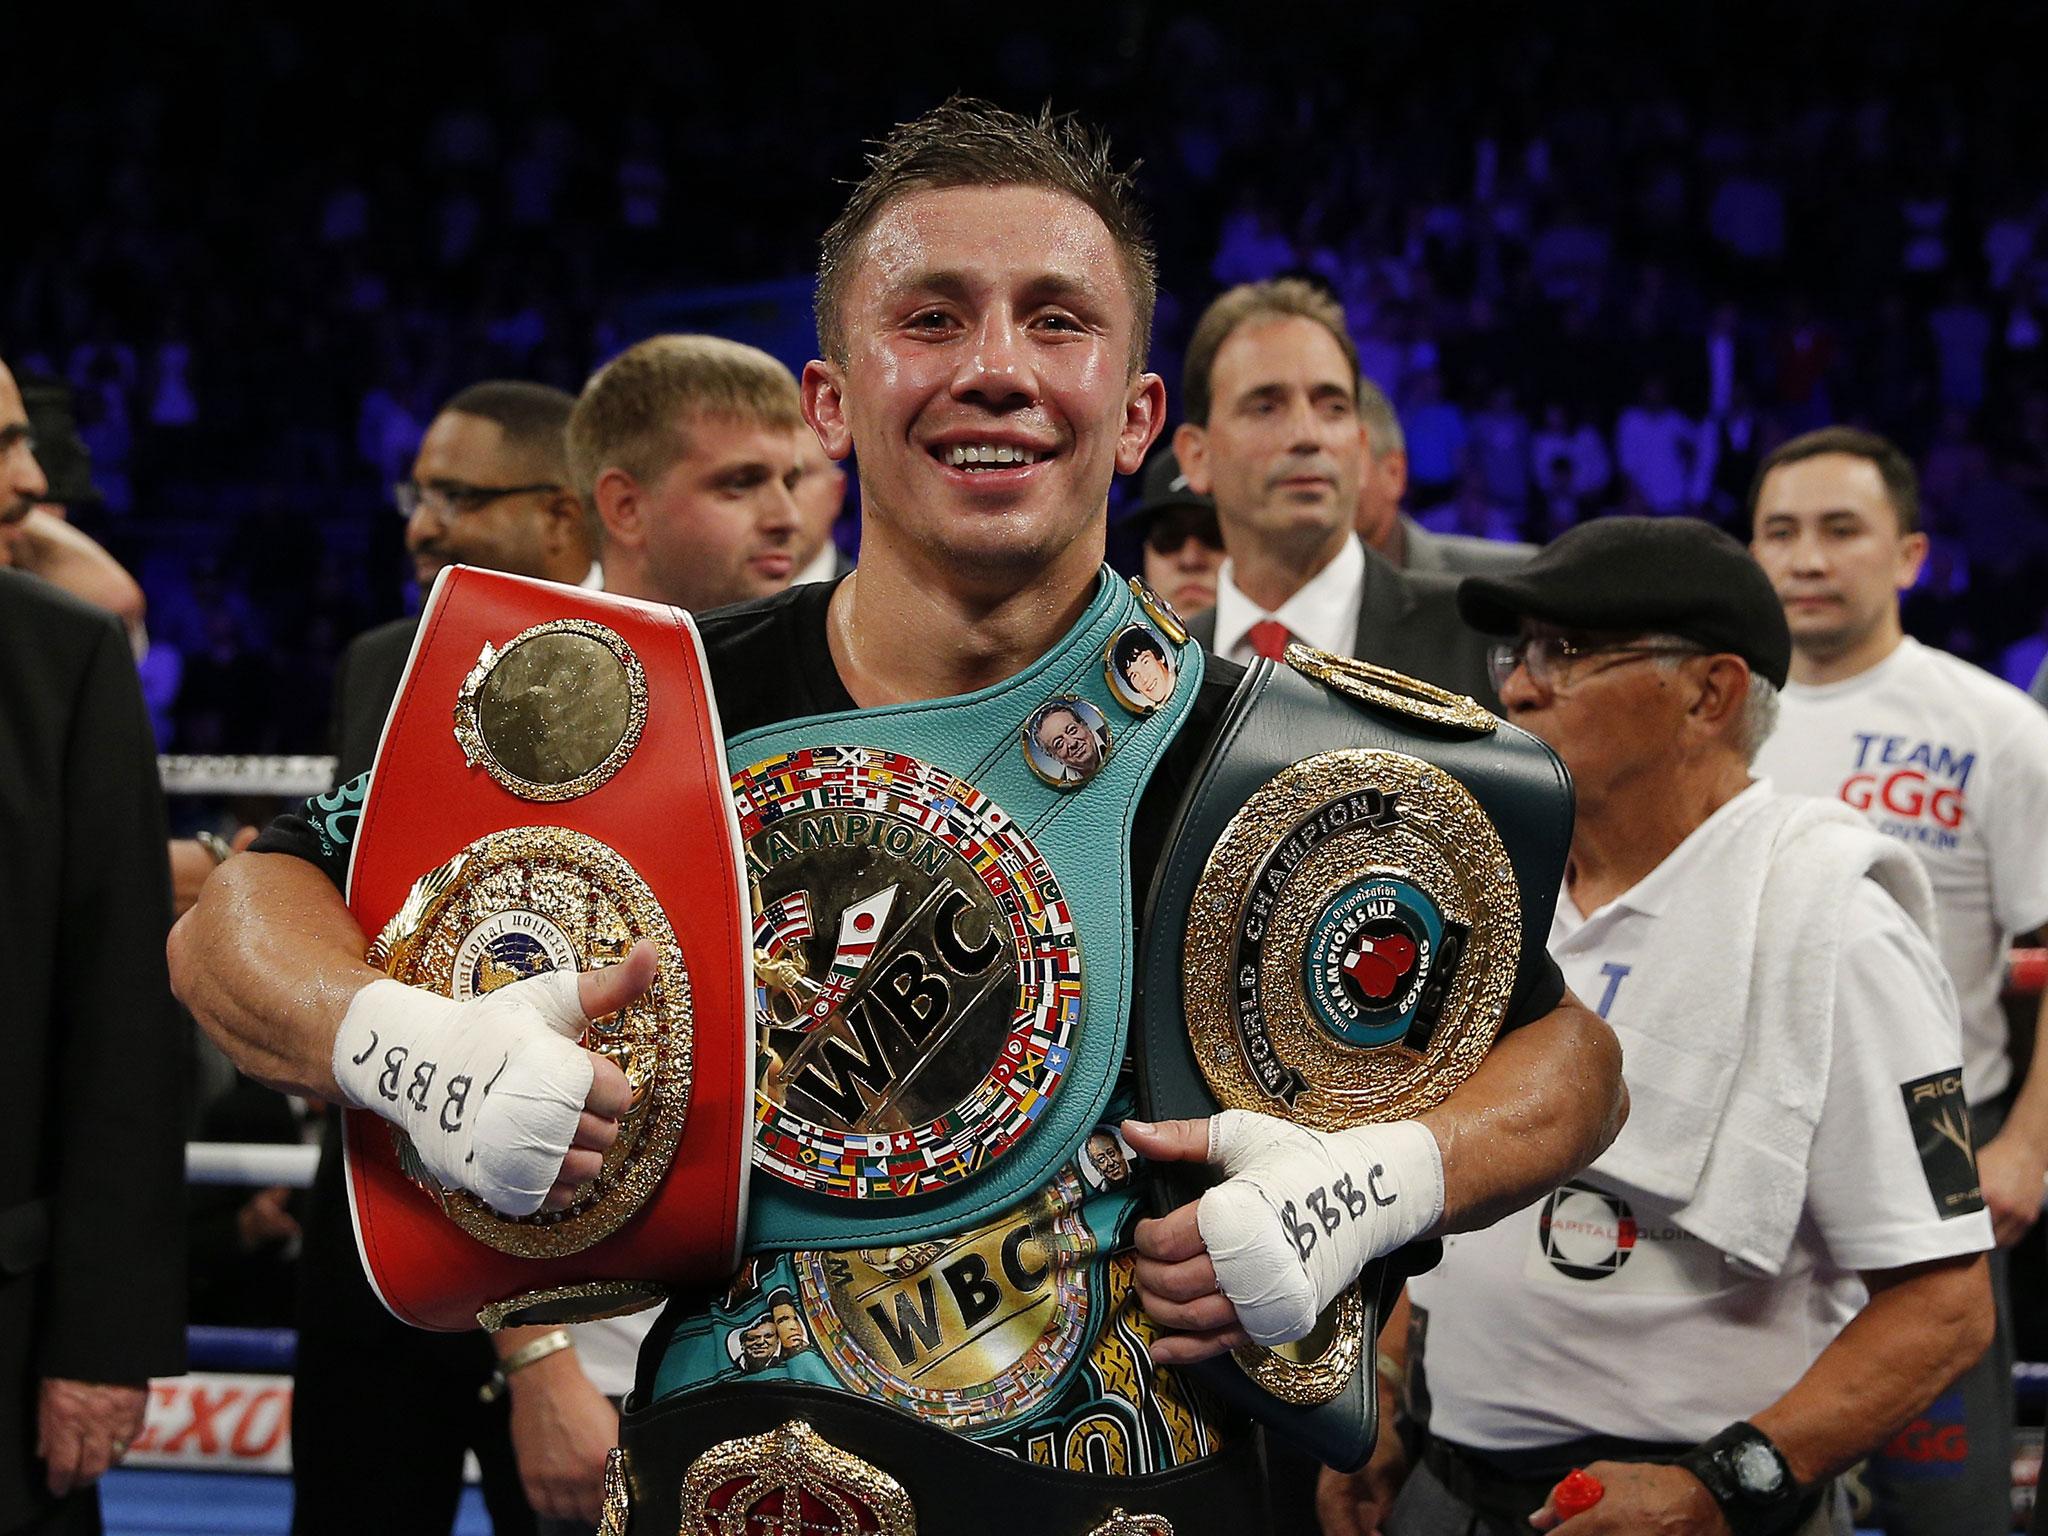 Gennady Golovkin celebrates retaining his WBC, IBF and IBO World Middleweight titles after stopping Kell Brook at the O2